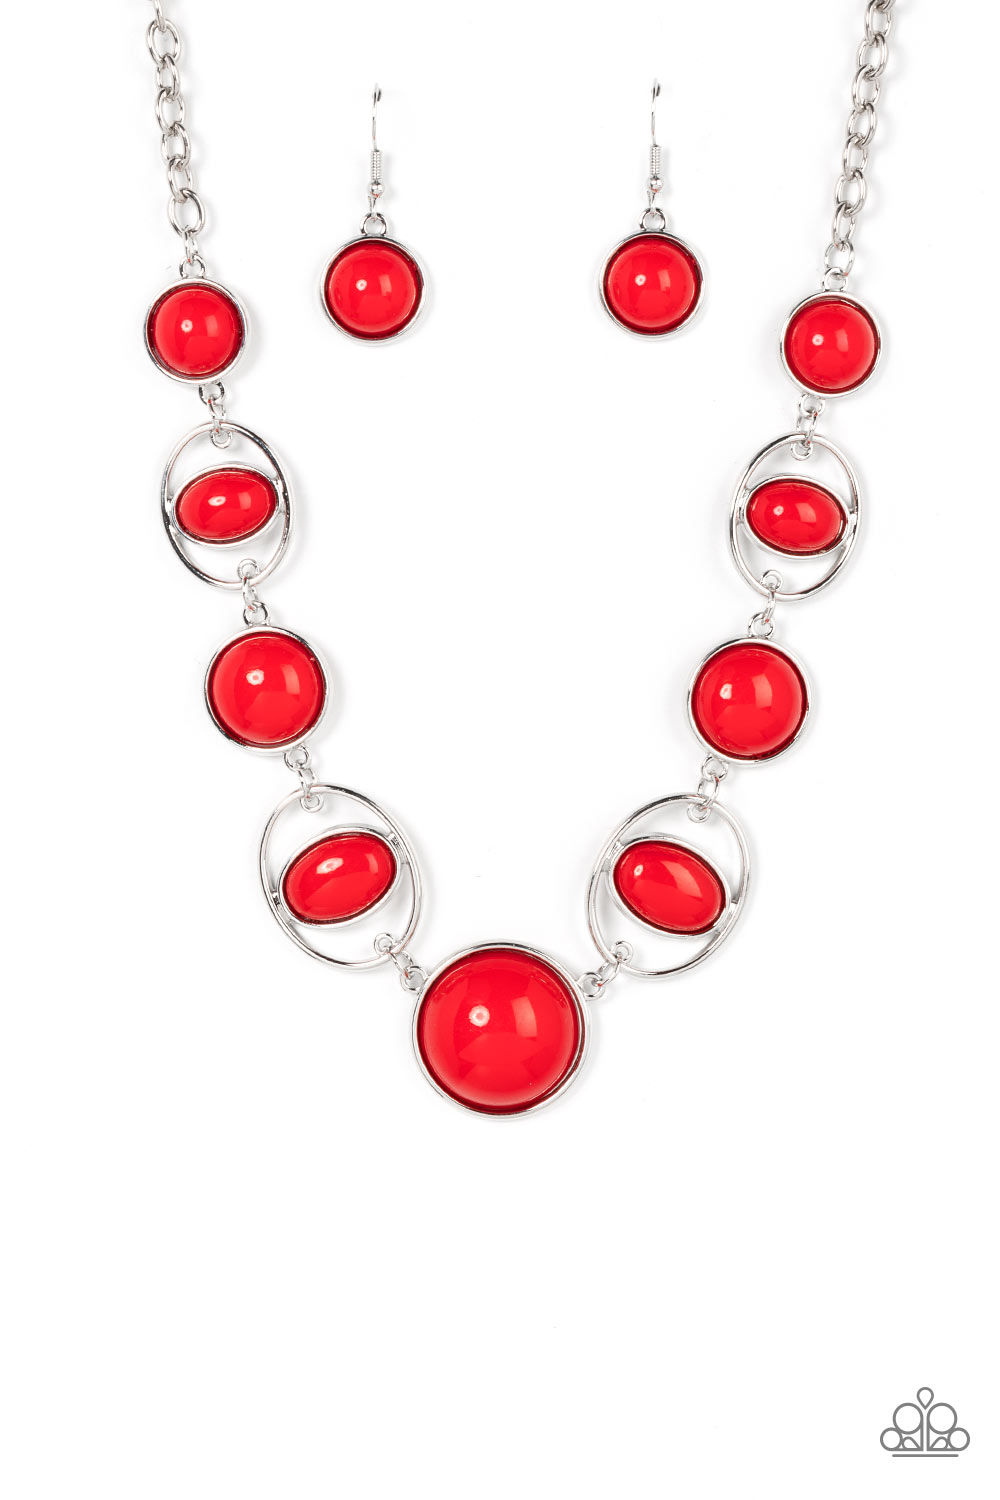 Eye of the BEAD-holder - Red